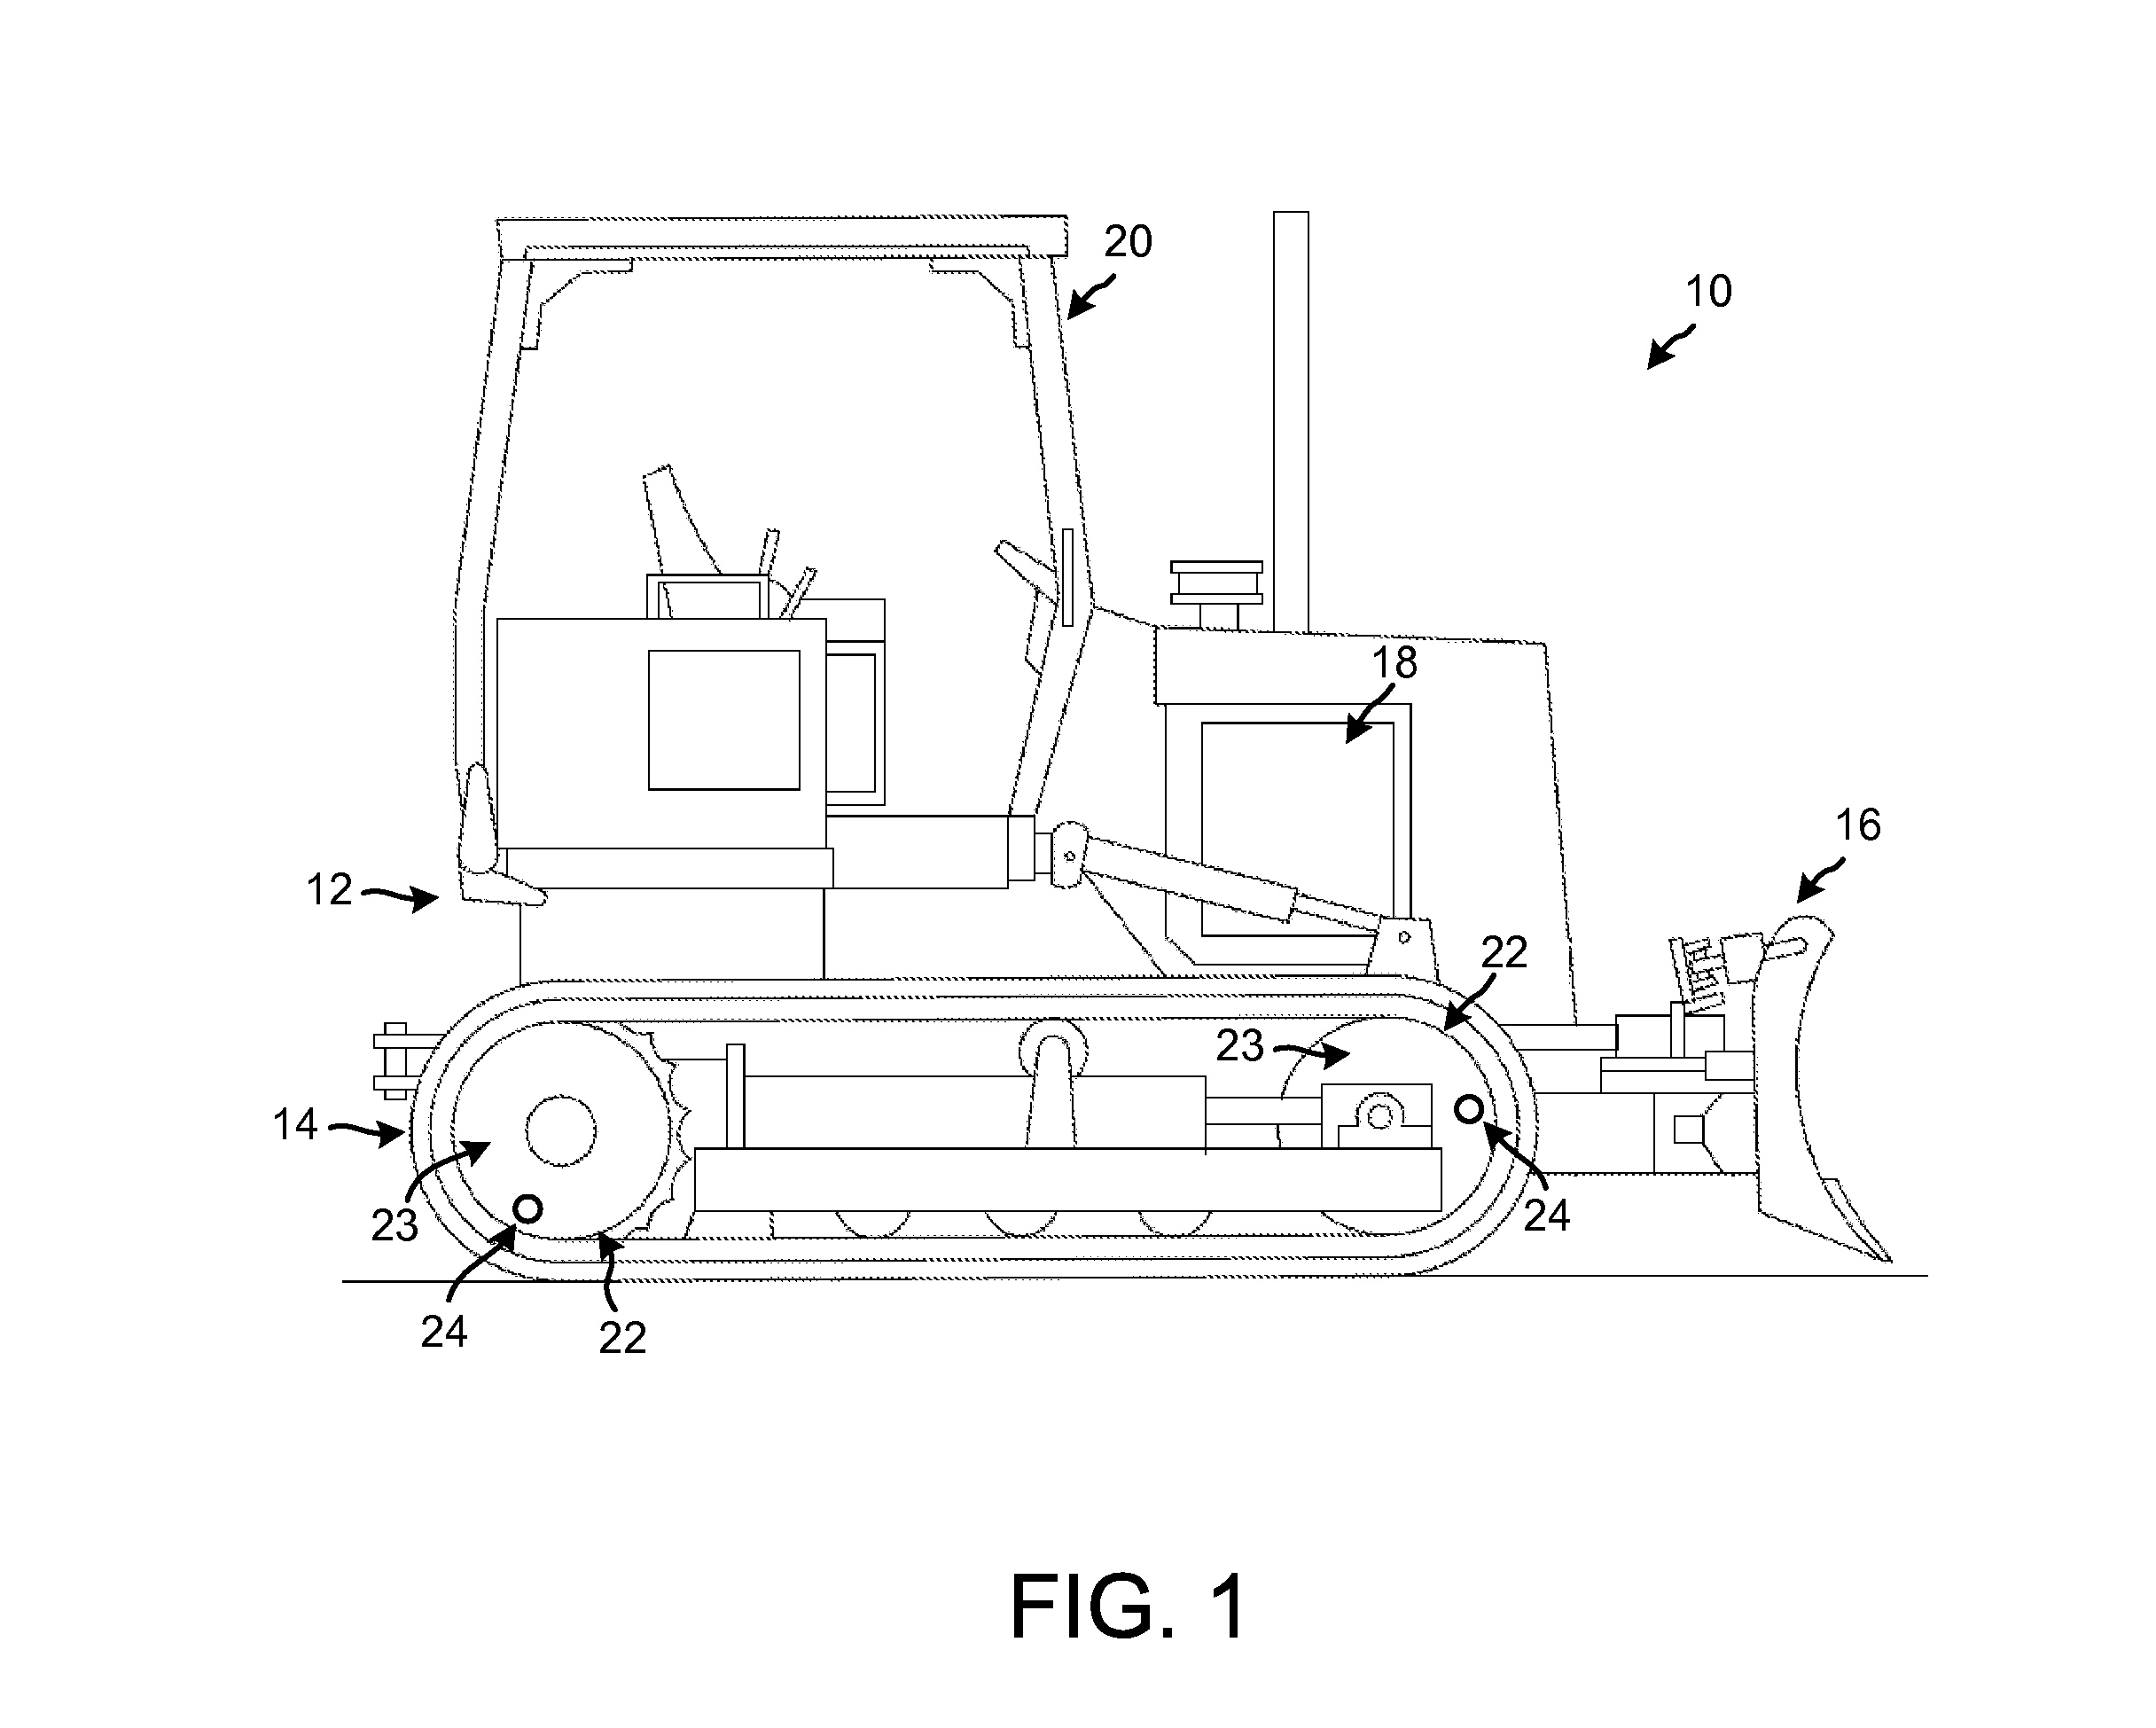 Liquid level detection system for a driveline component